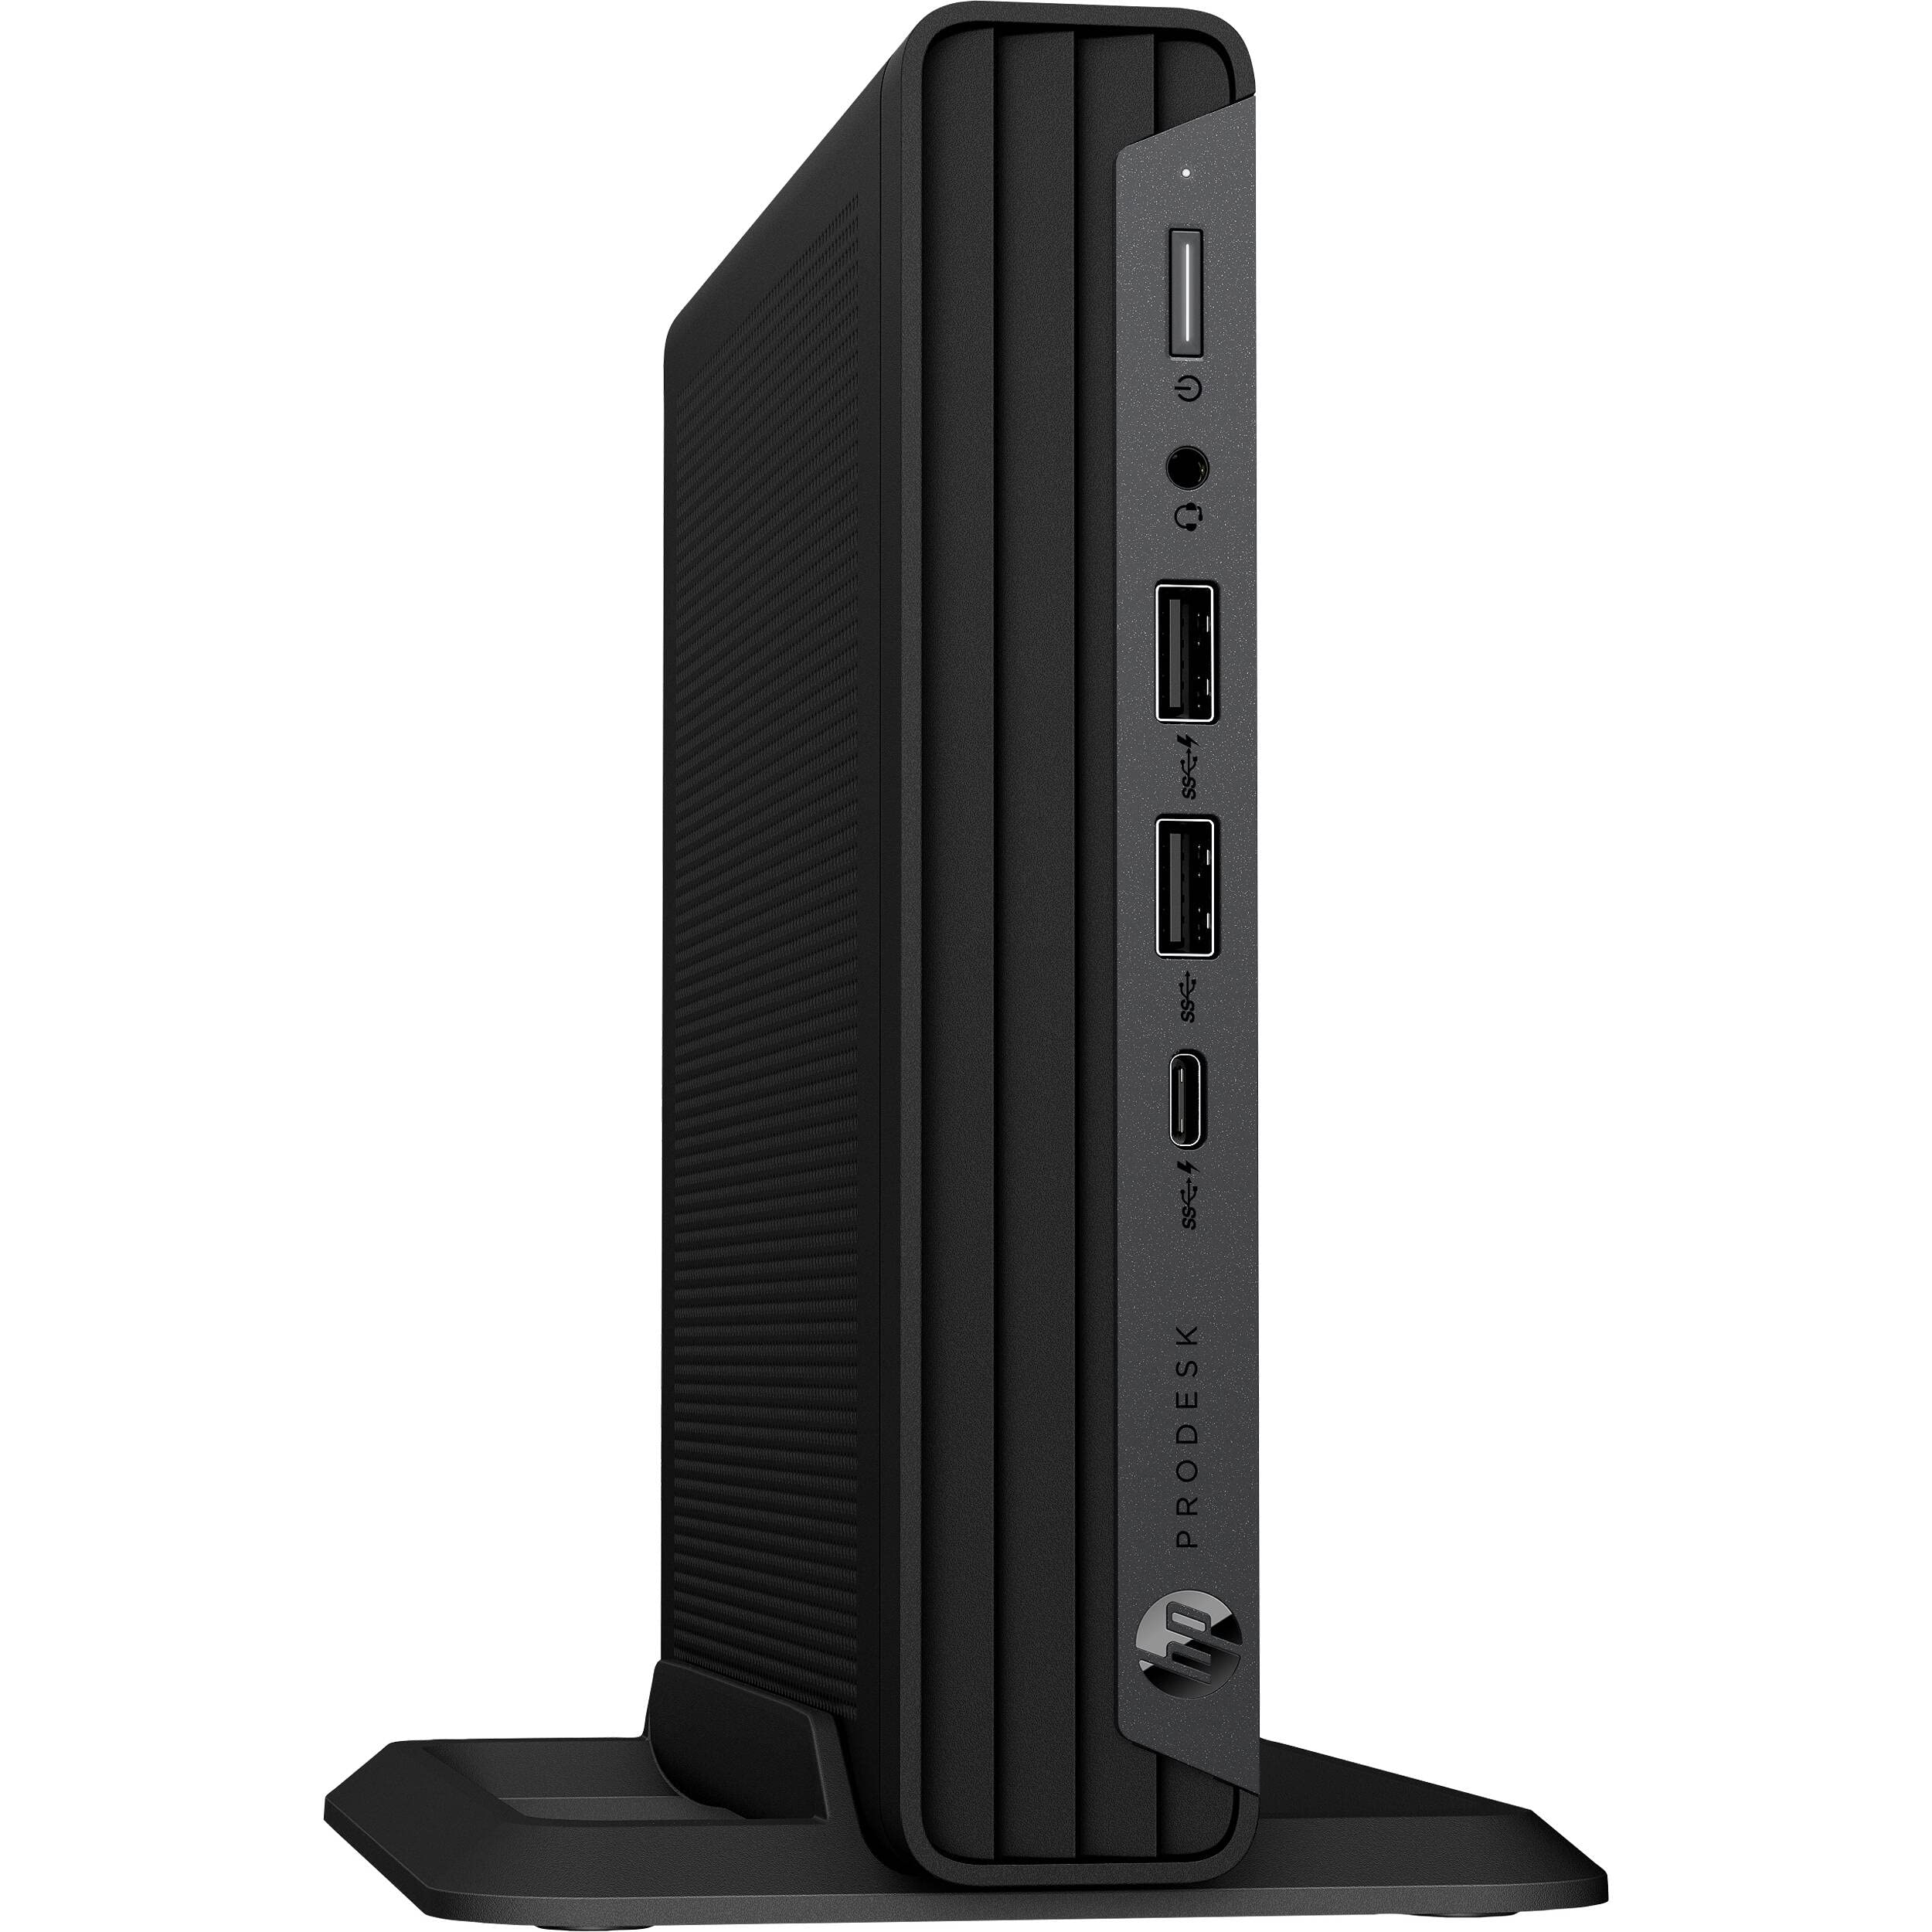 HP ProDesk 600 G6 Mini Business Desktop Computer, Intel Hexa-Core i5-10500T (Beat i7-8700T), 8GB DDR4 RAM, 256GB PCIe SSD, WiFi 6, Bluetooth 5.2, Keyboard and Mouse, Windows 11 Pro, BROAG HDMI Cable